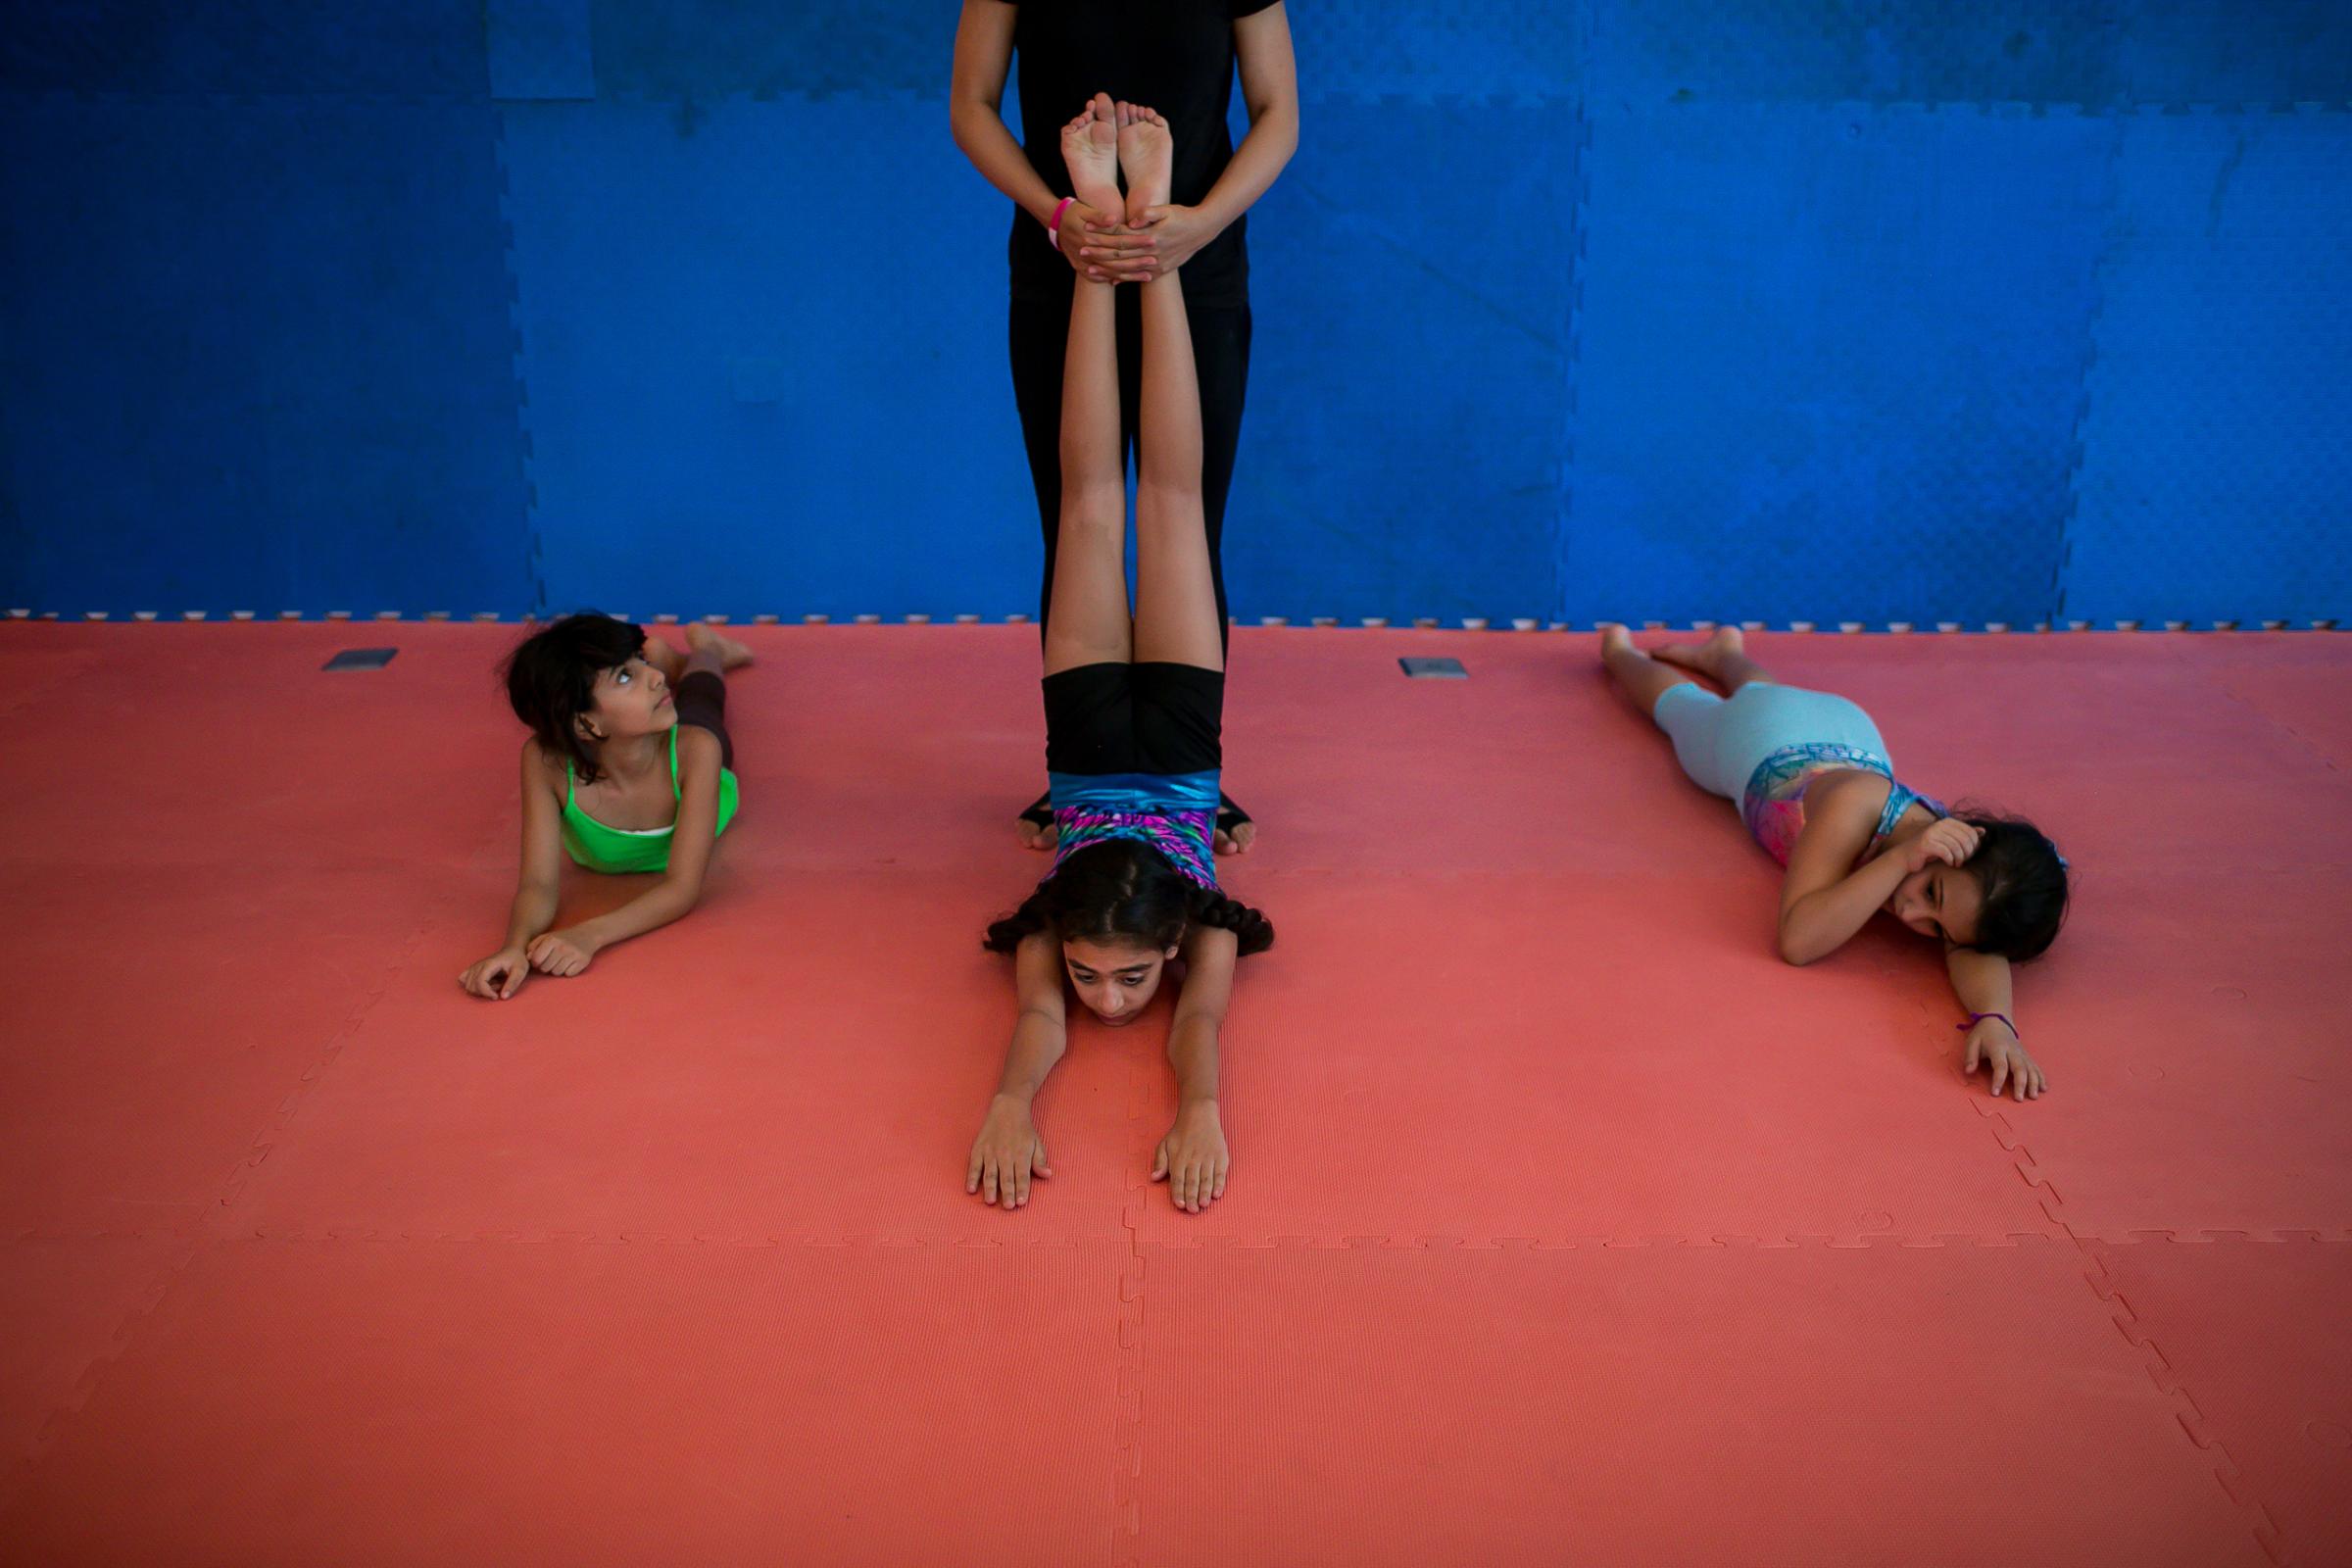 Mai’s daughter, who aspires to be an actress and acrobat, attends a gym for young girls in Jeddah.